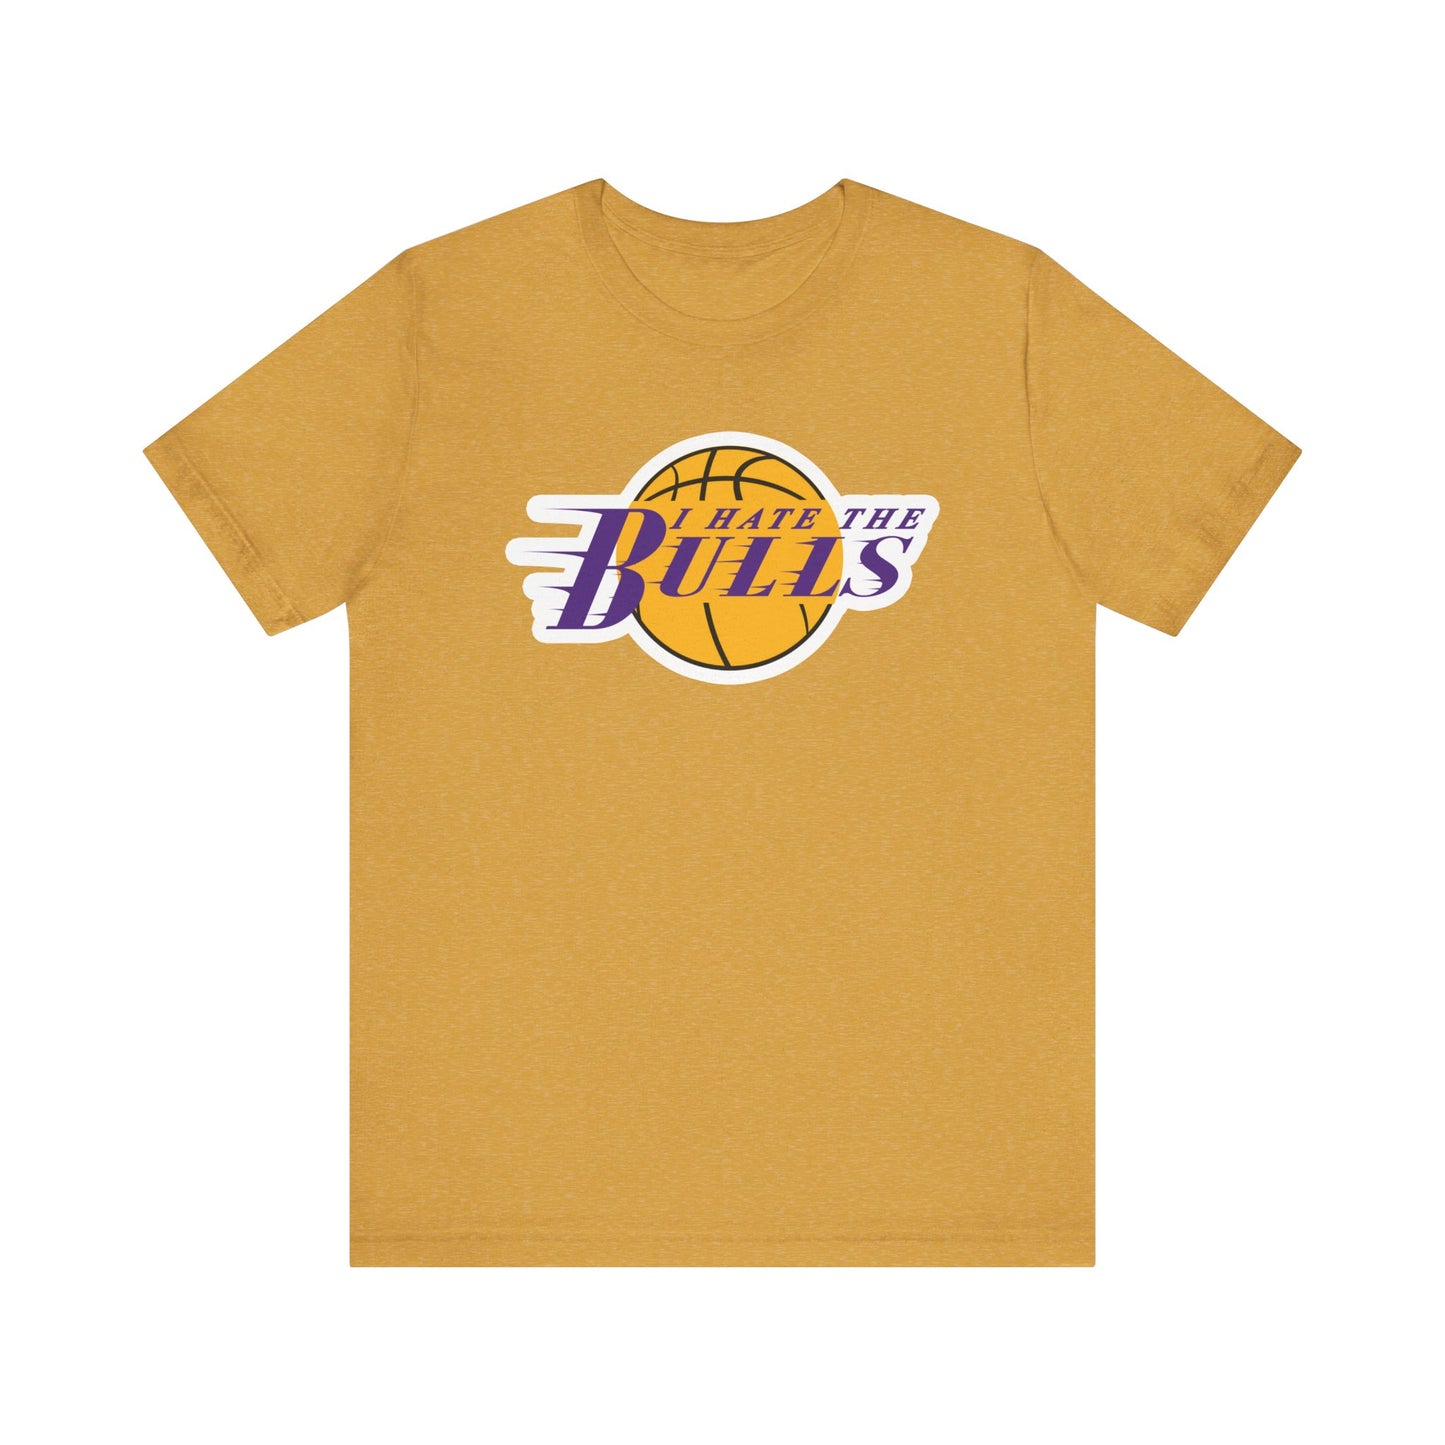 I Hate The Boohls (for Lake Show fans) - Unisex Jersey Short Sleeve Tee